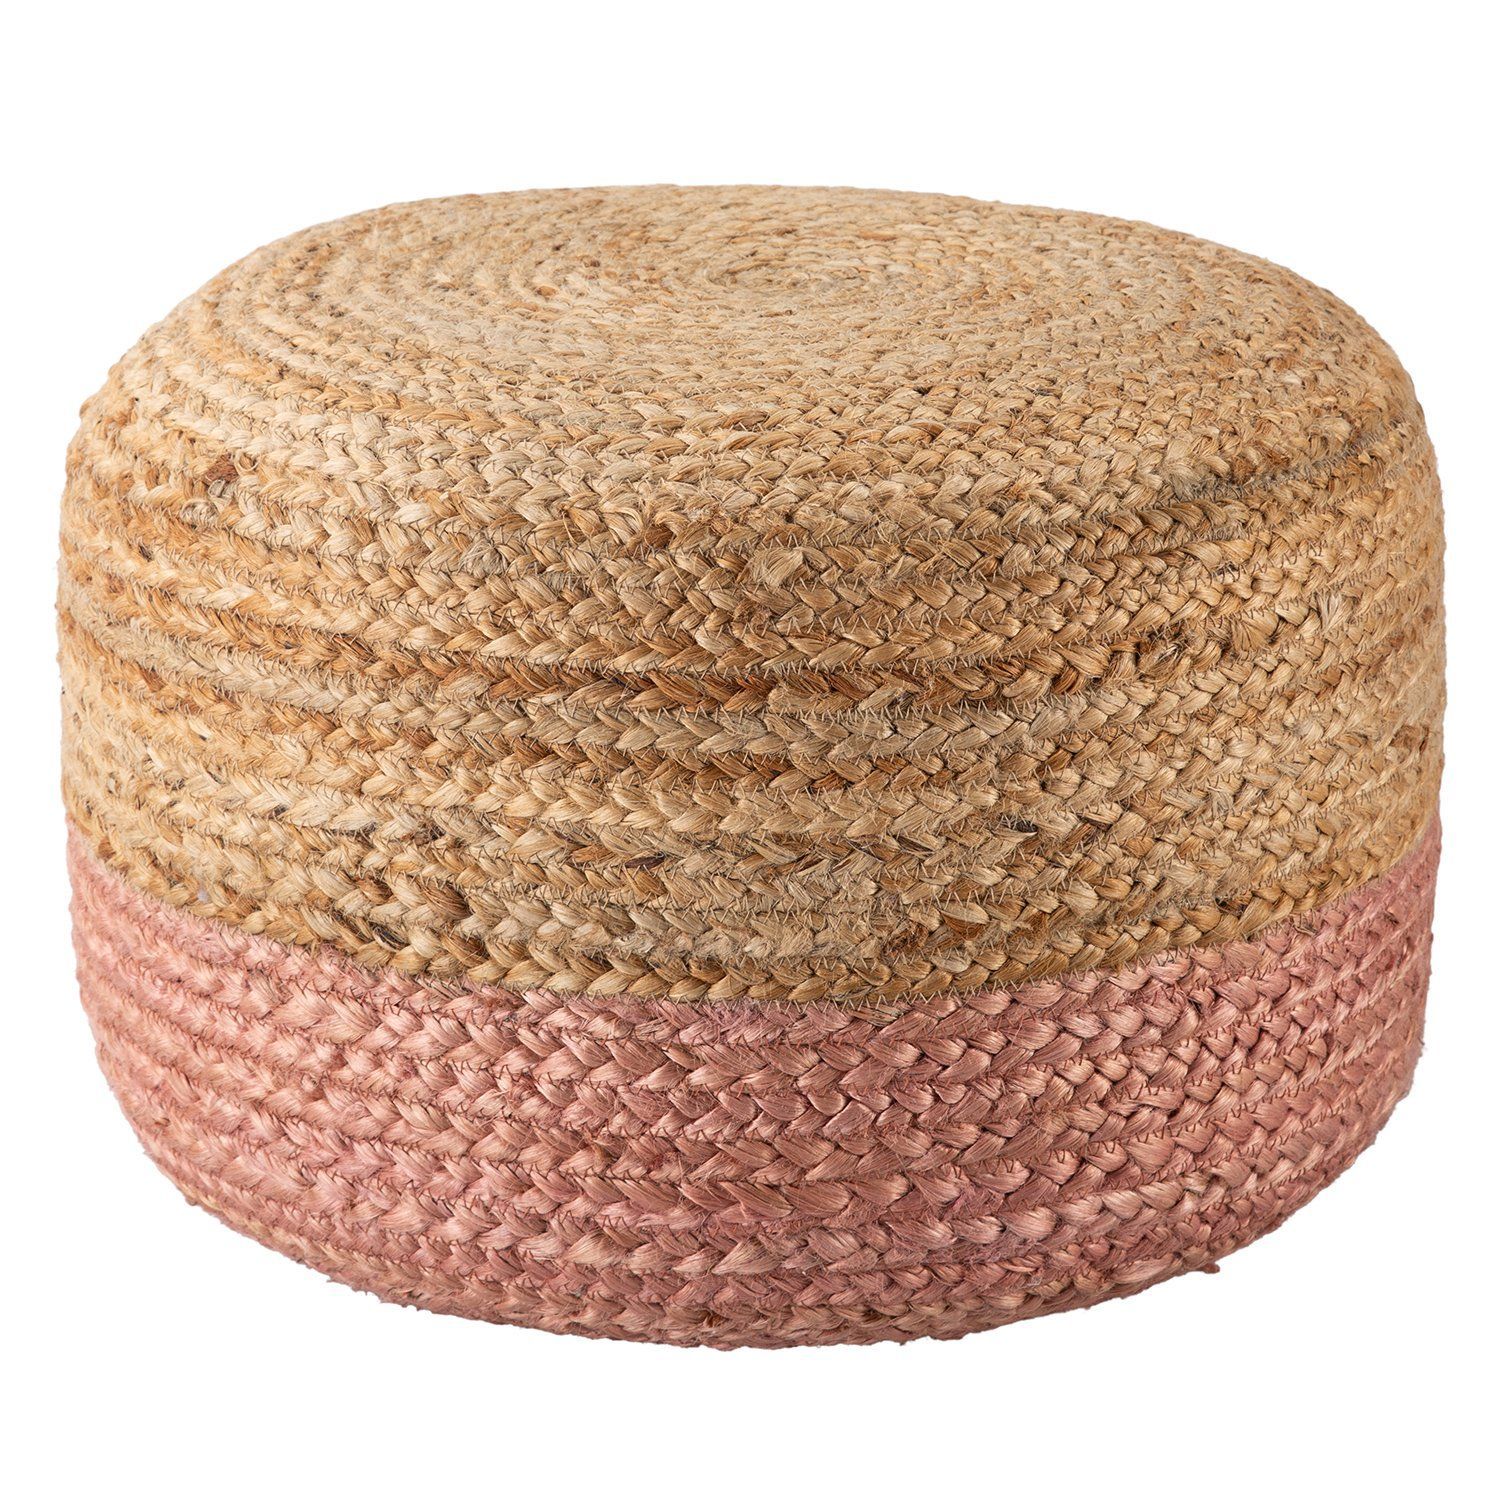 Jaipur Saba Oliana Jute Pouf In 2021 | Pouf Ottoman, Pouf, Ottoman With White And Beige Ombre Cylinder Pouf Ottomans (View 5 of 20)